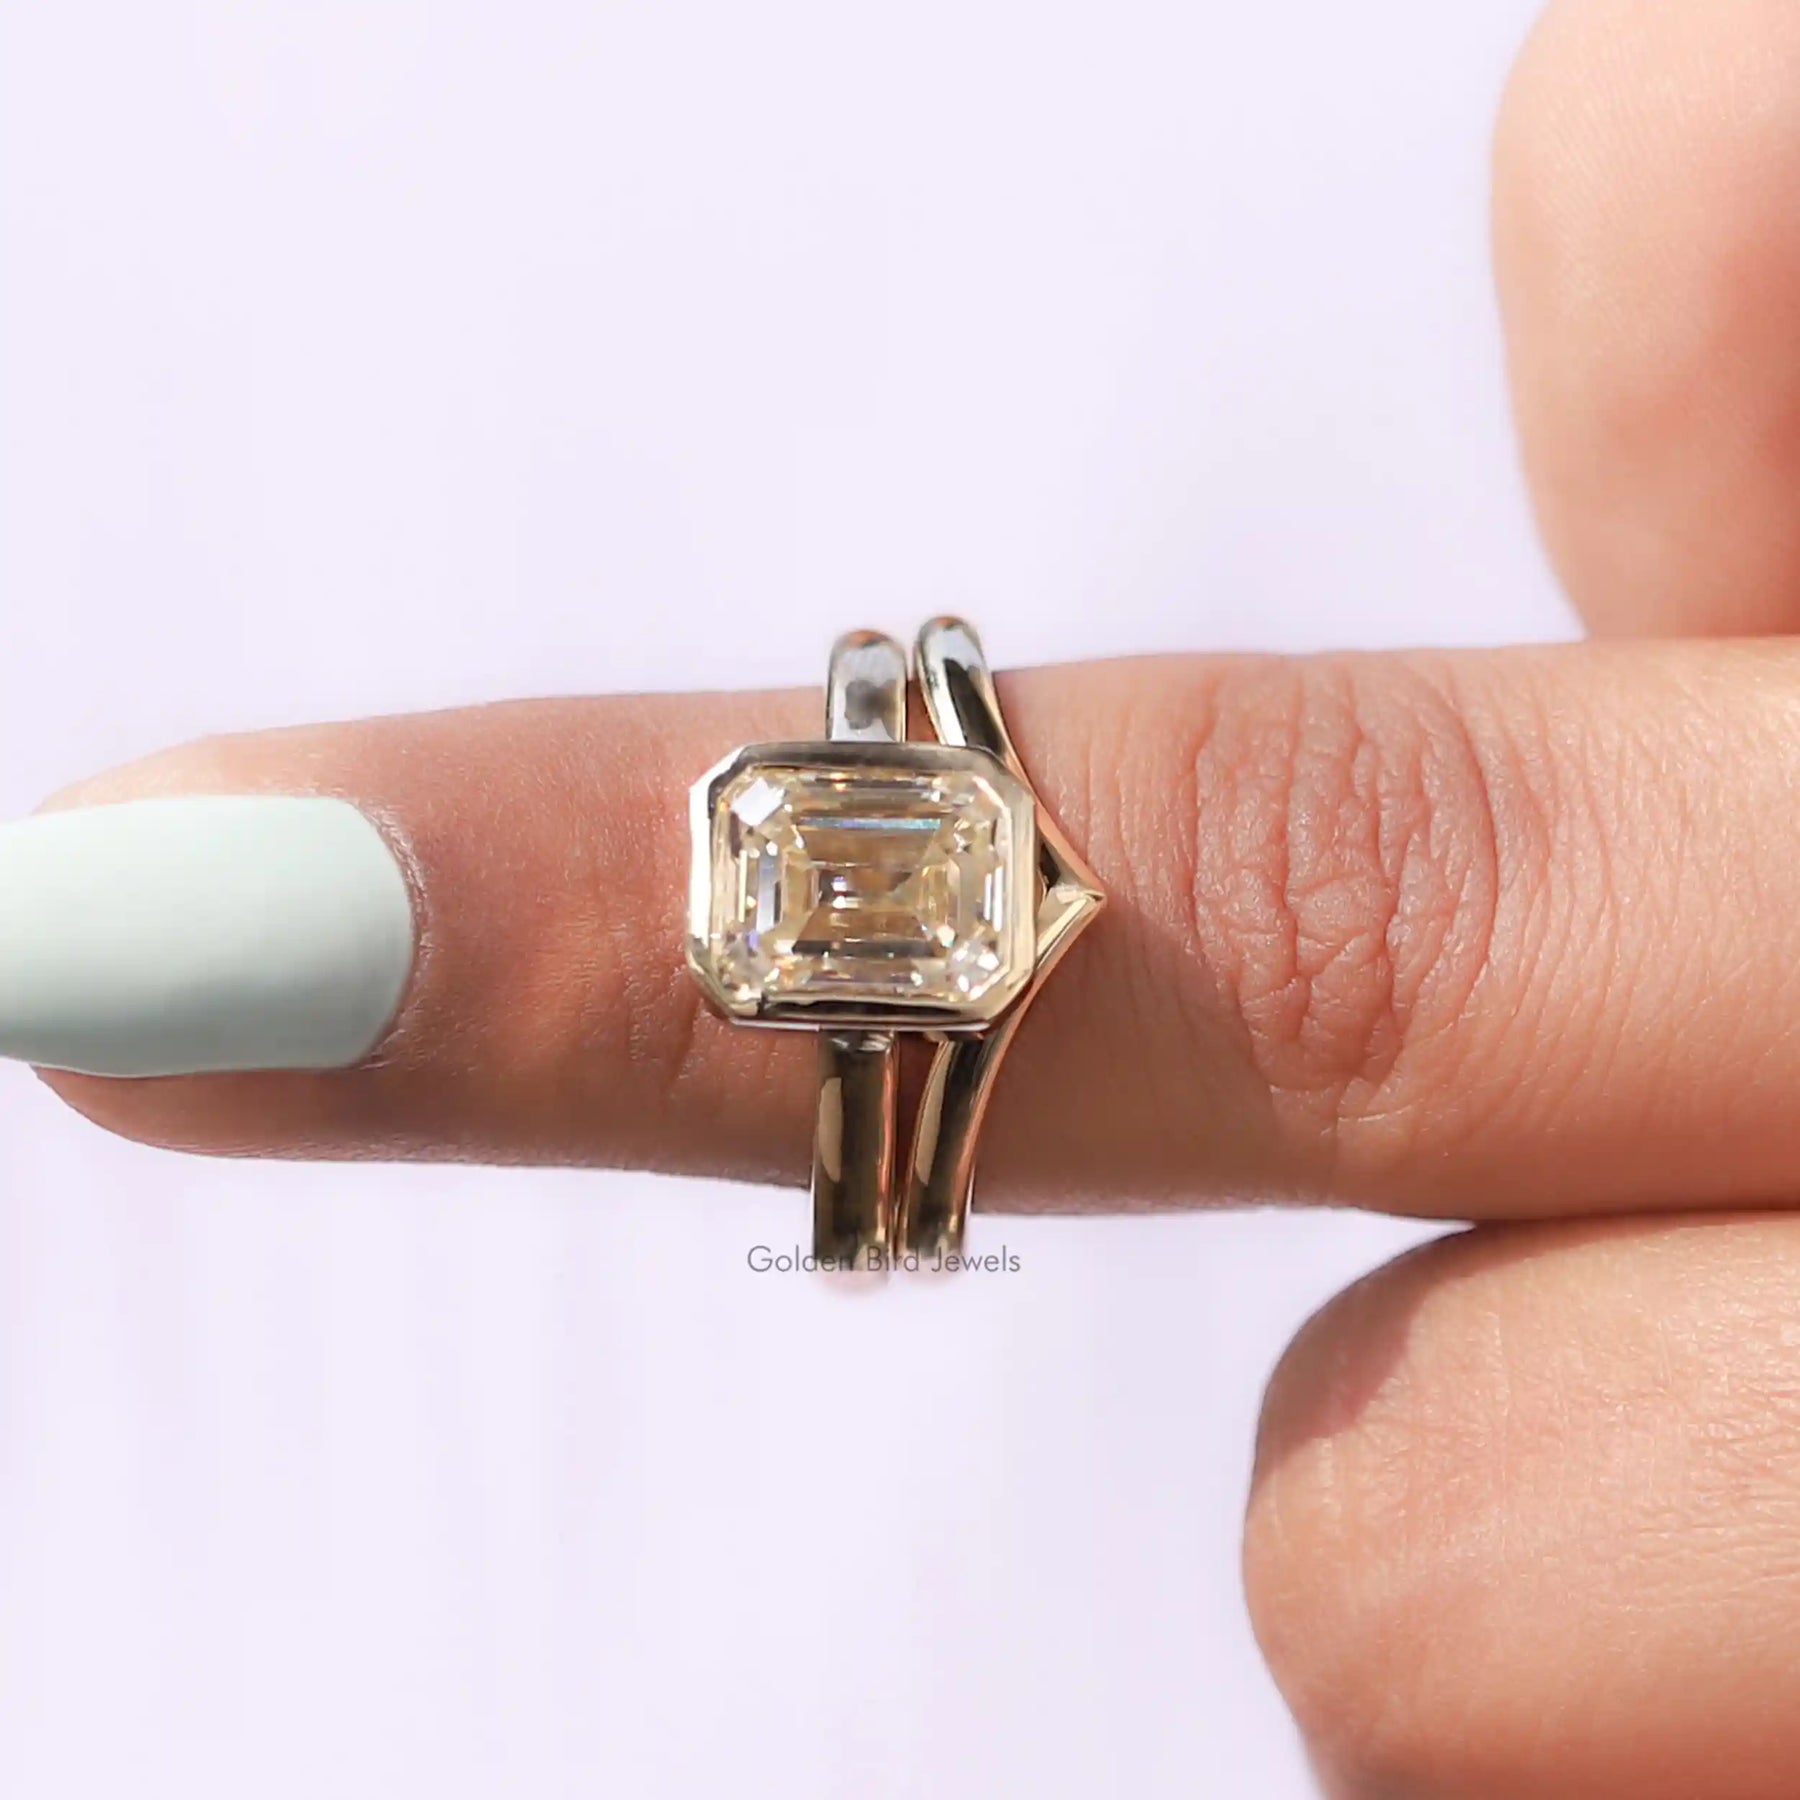 [Front view of off white emerald cut moissanite ring]-[Golden Bird Jewels]